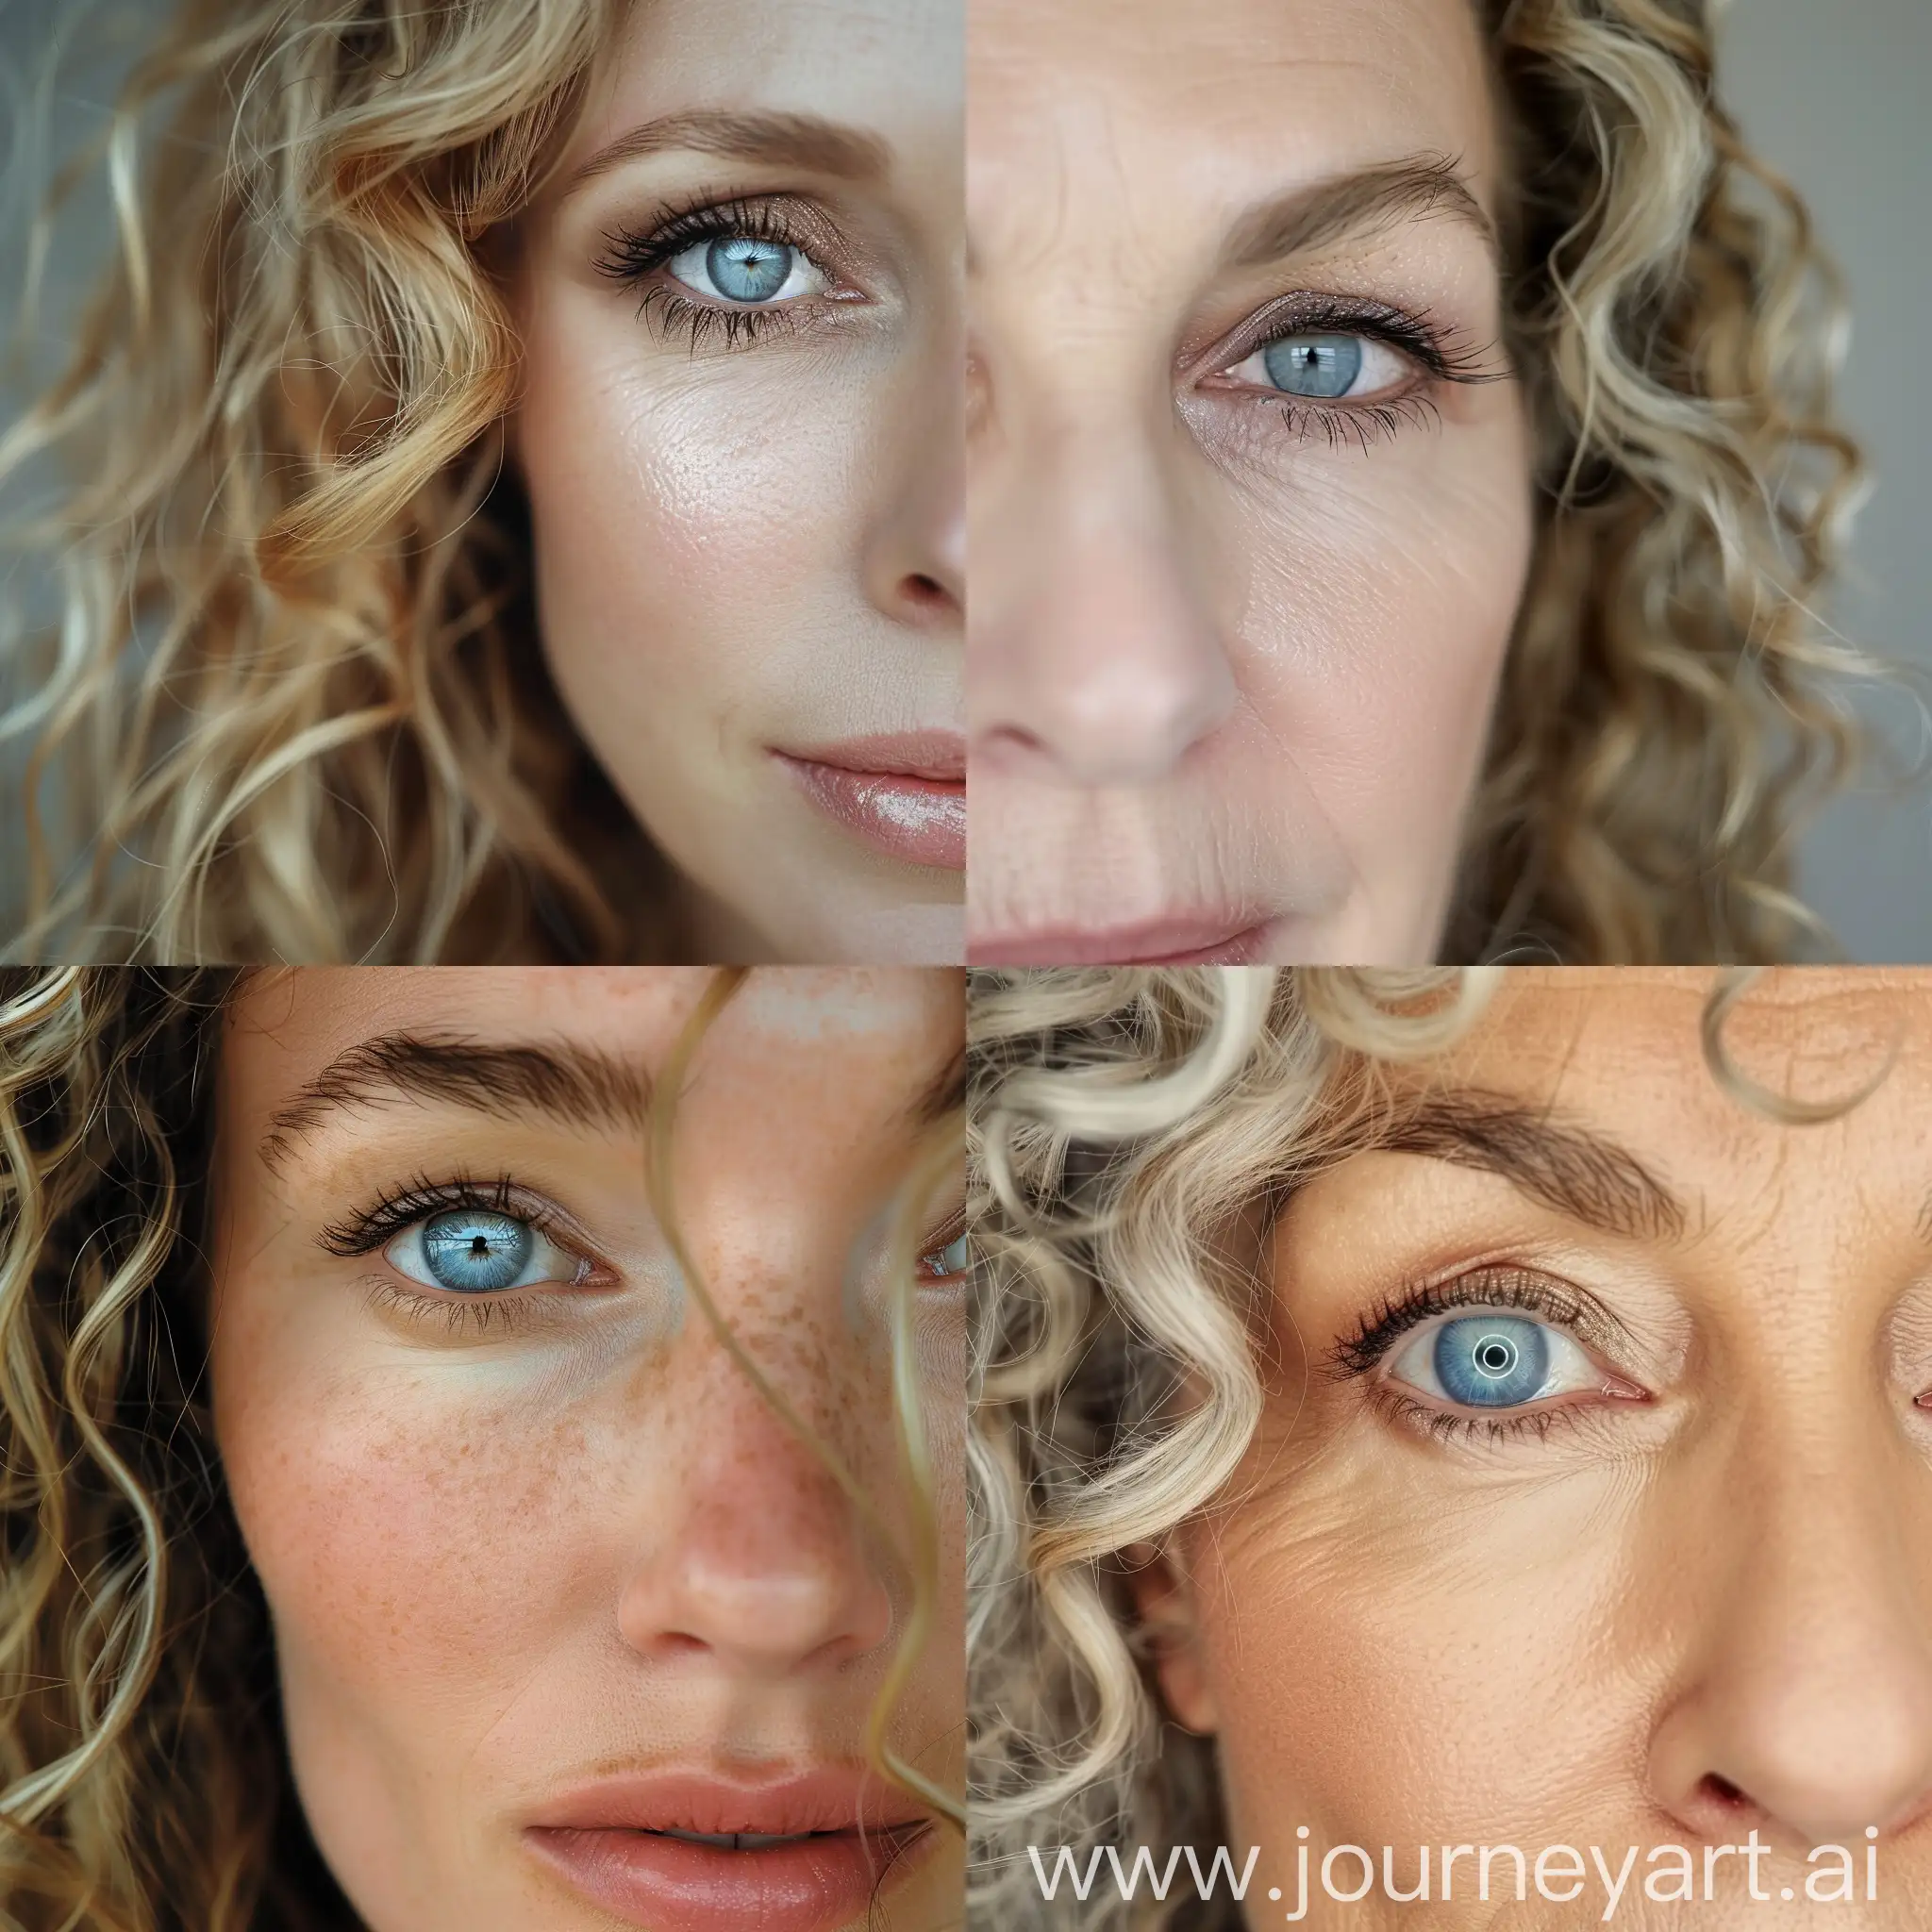 Flattering-Eye-Makeup-for-45YearOld-Woman-with-Blue-Eyes-Blond-Curly-Hair-and-Fair-Skin